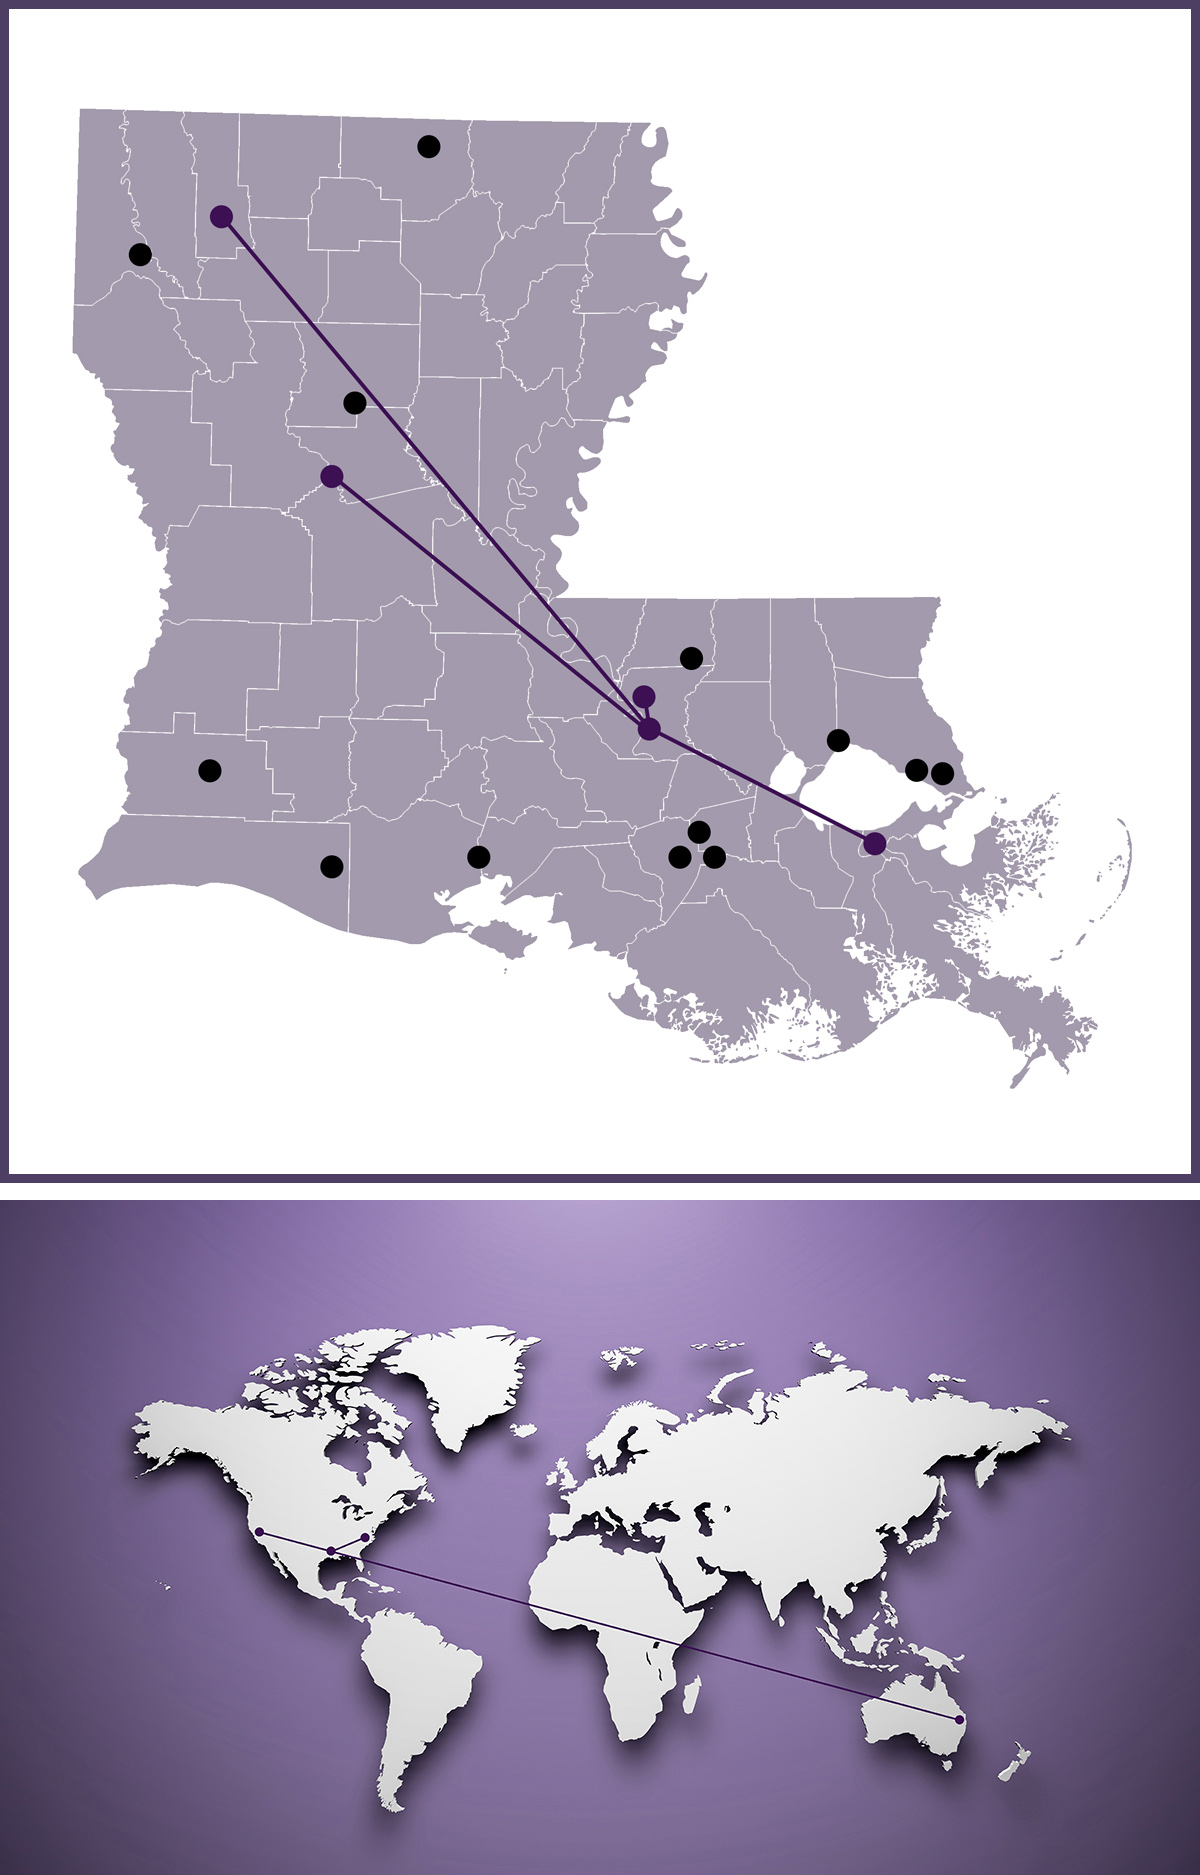 The LSU SRP has global reach